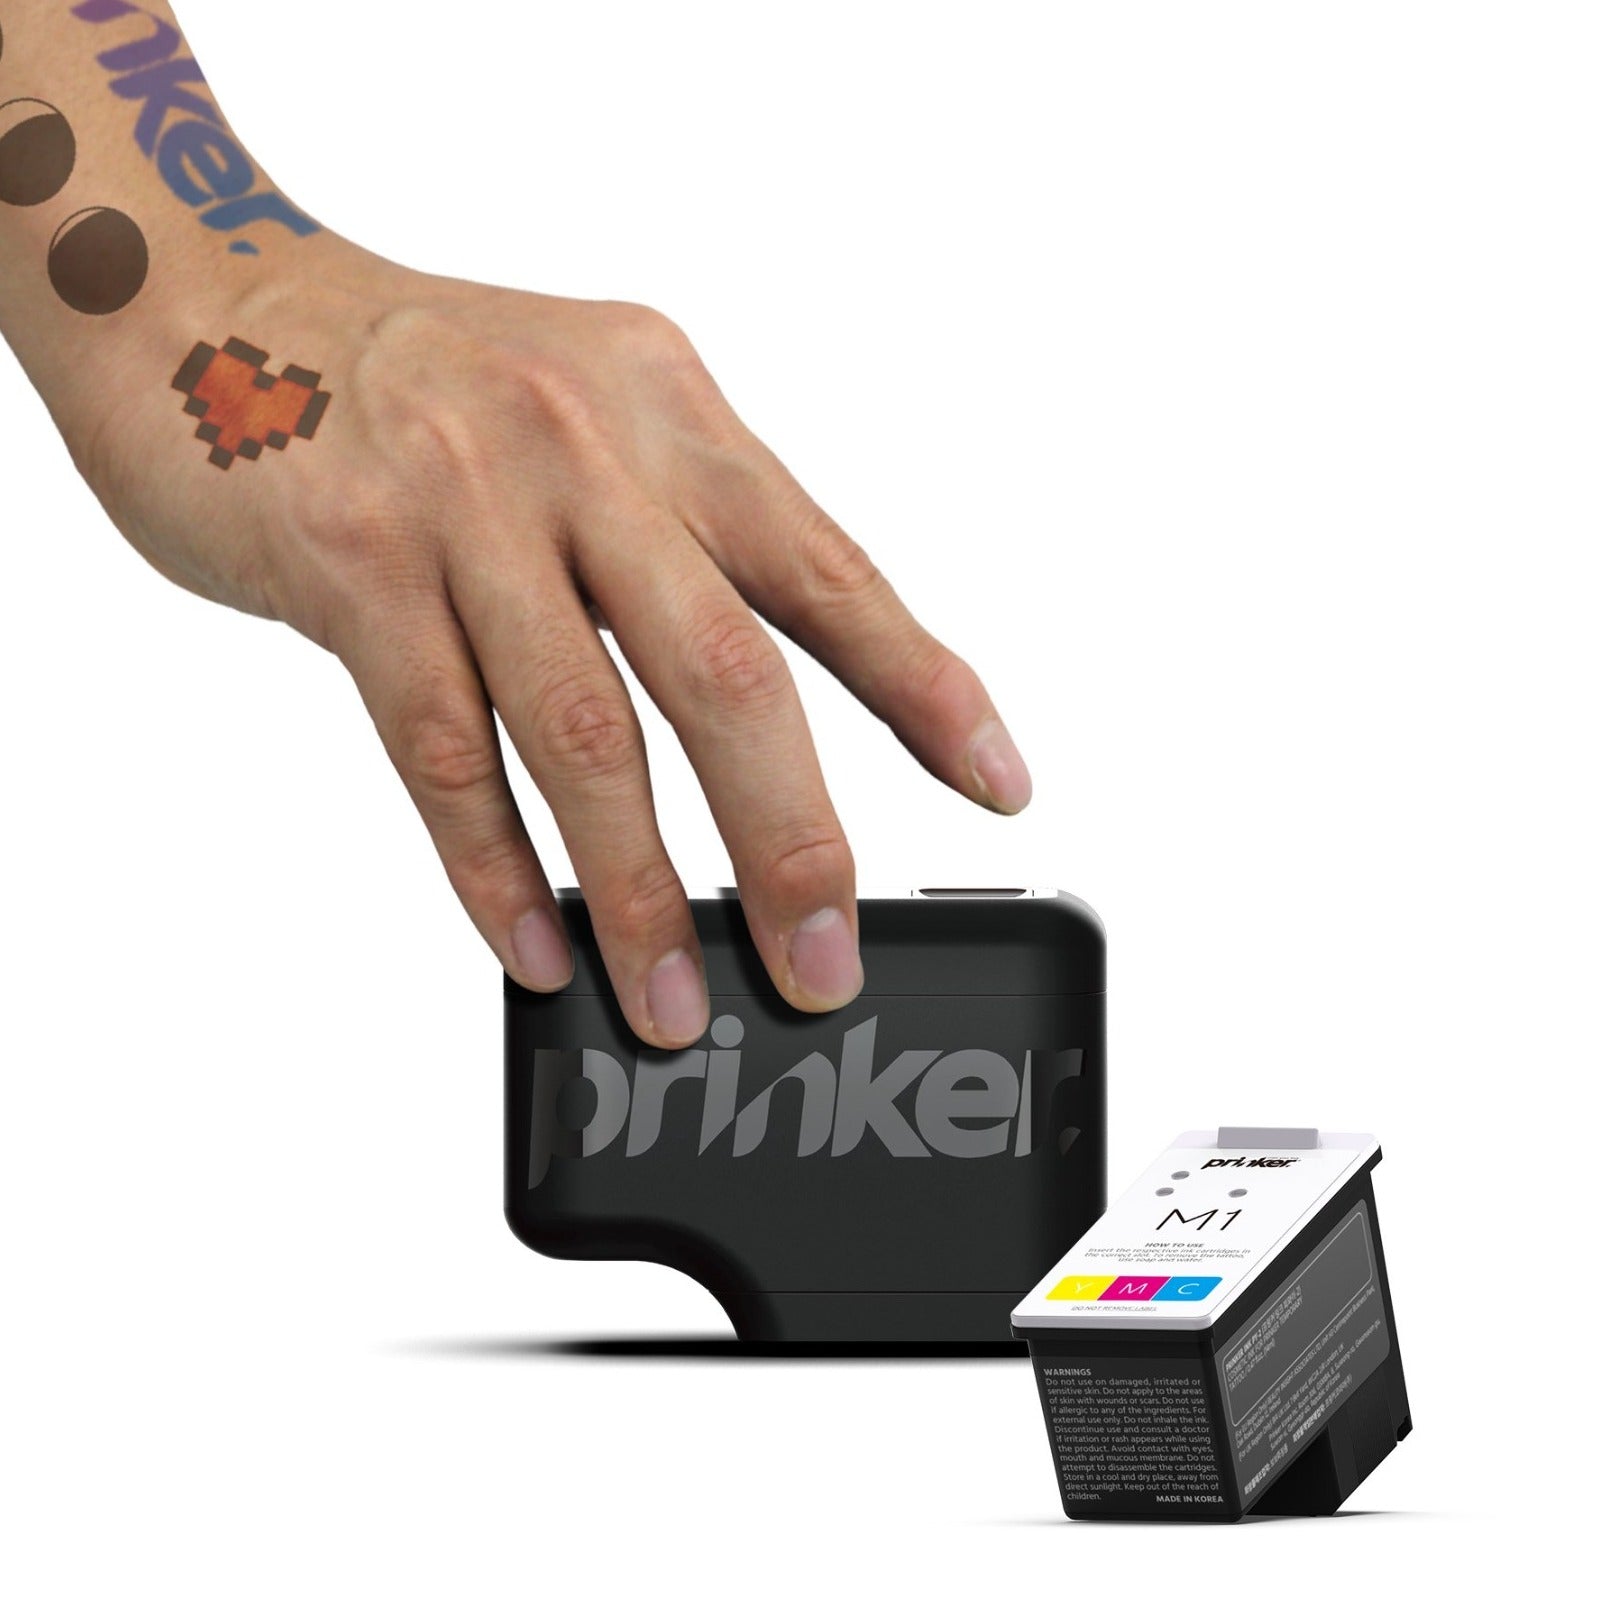 Introducing the Ultra Portable Prinker M Digital Temporary Tattoos with  One Stroke